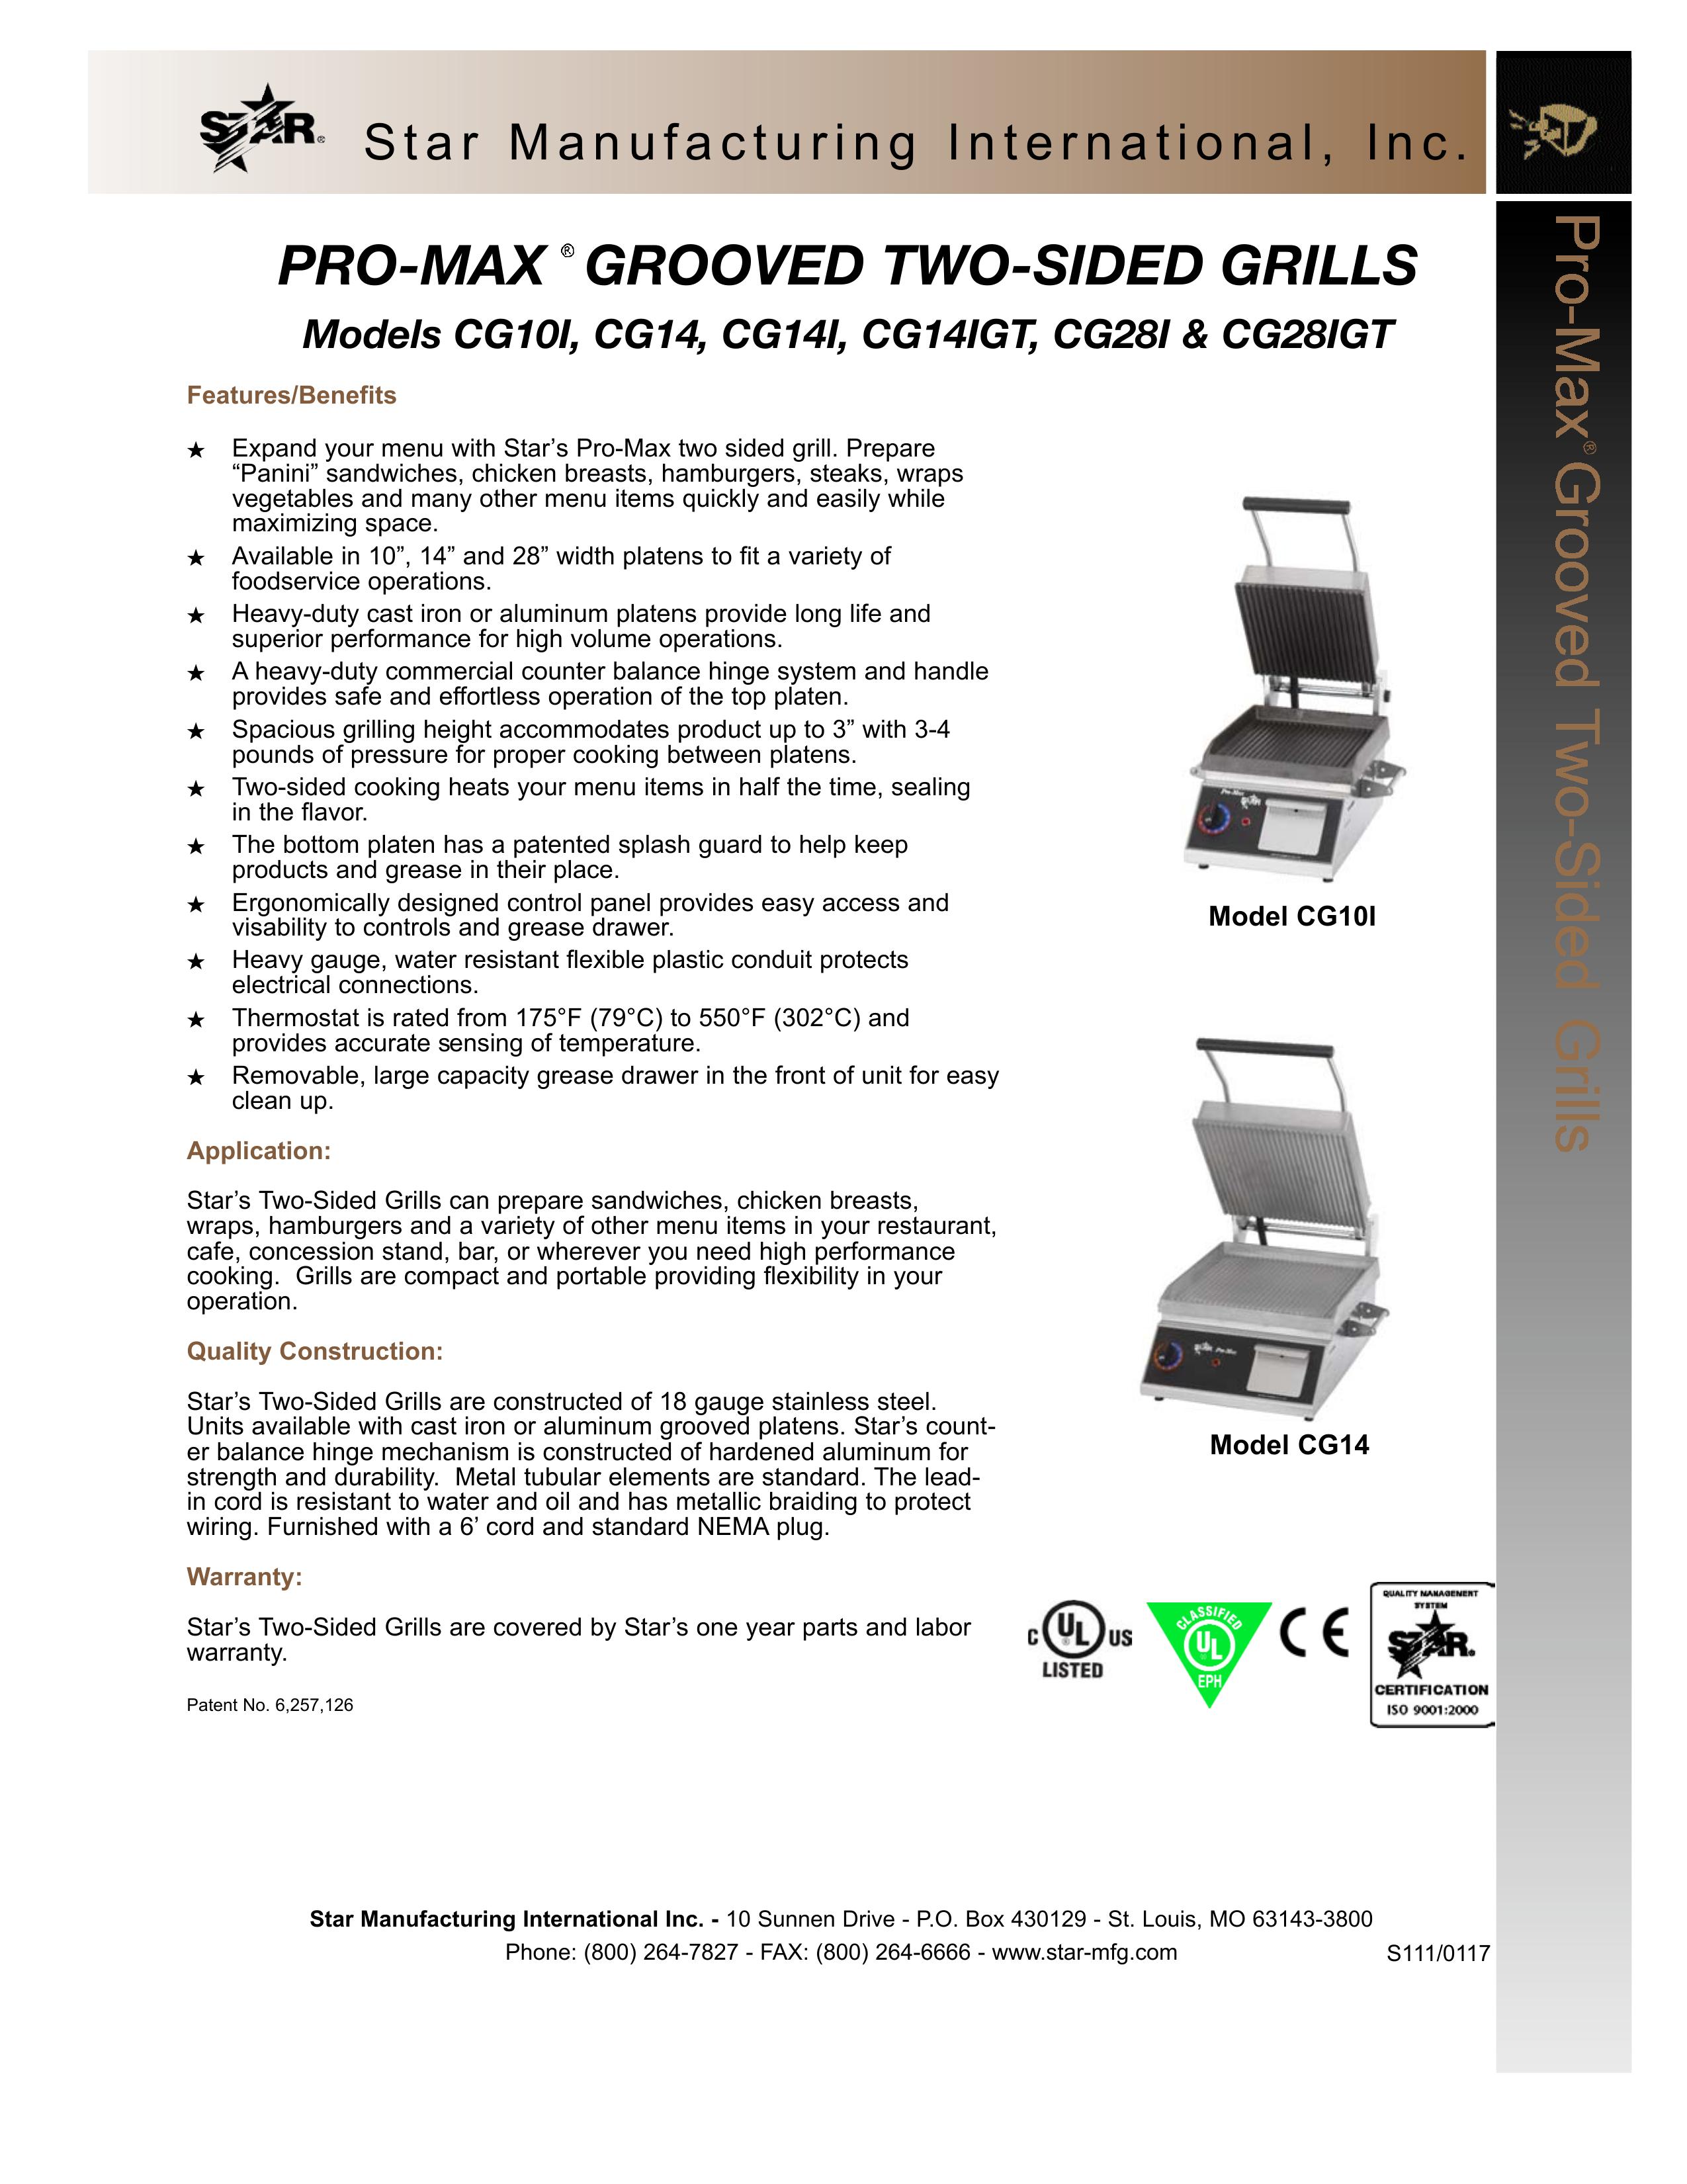 Star Manufacturing CG28I Gas Grill User Manual